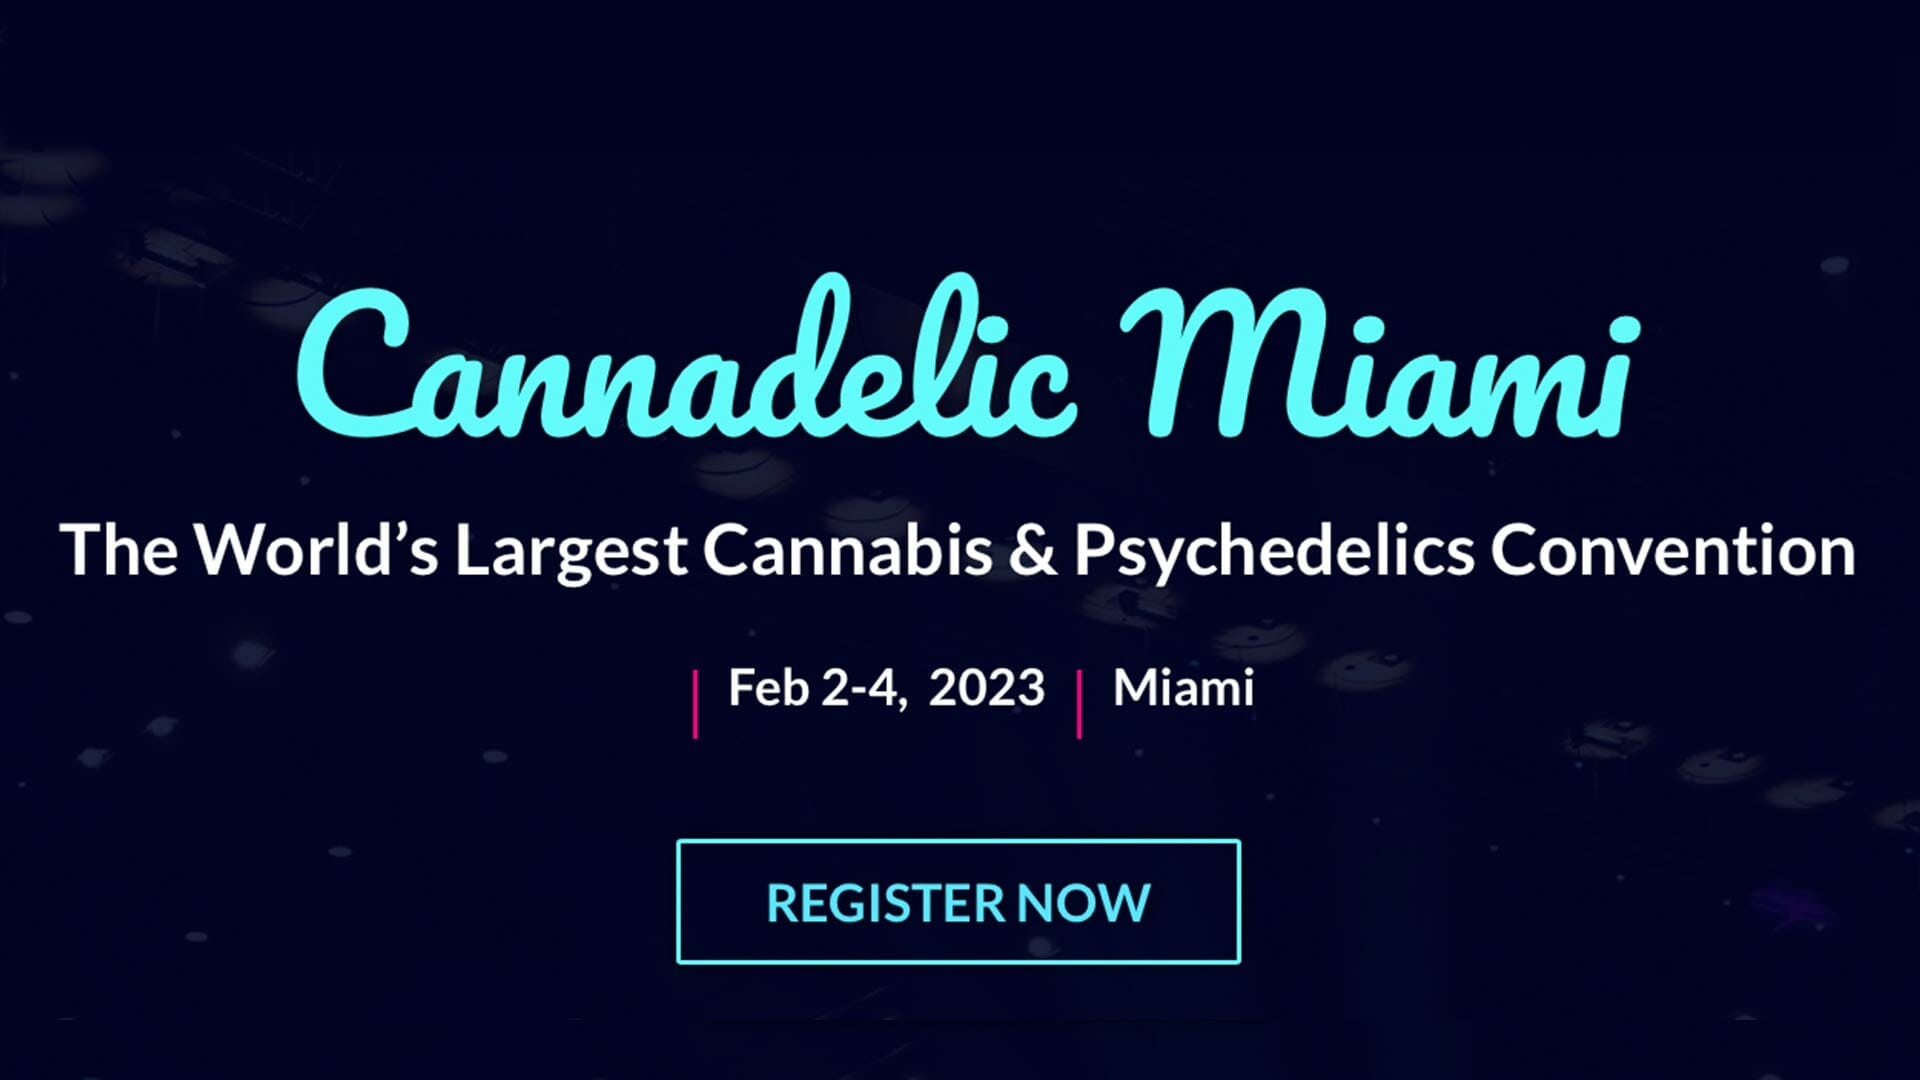 MY Self Wellness to Exhibit at Cannadelic Miami Conference, Feb. 2–4, 2023